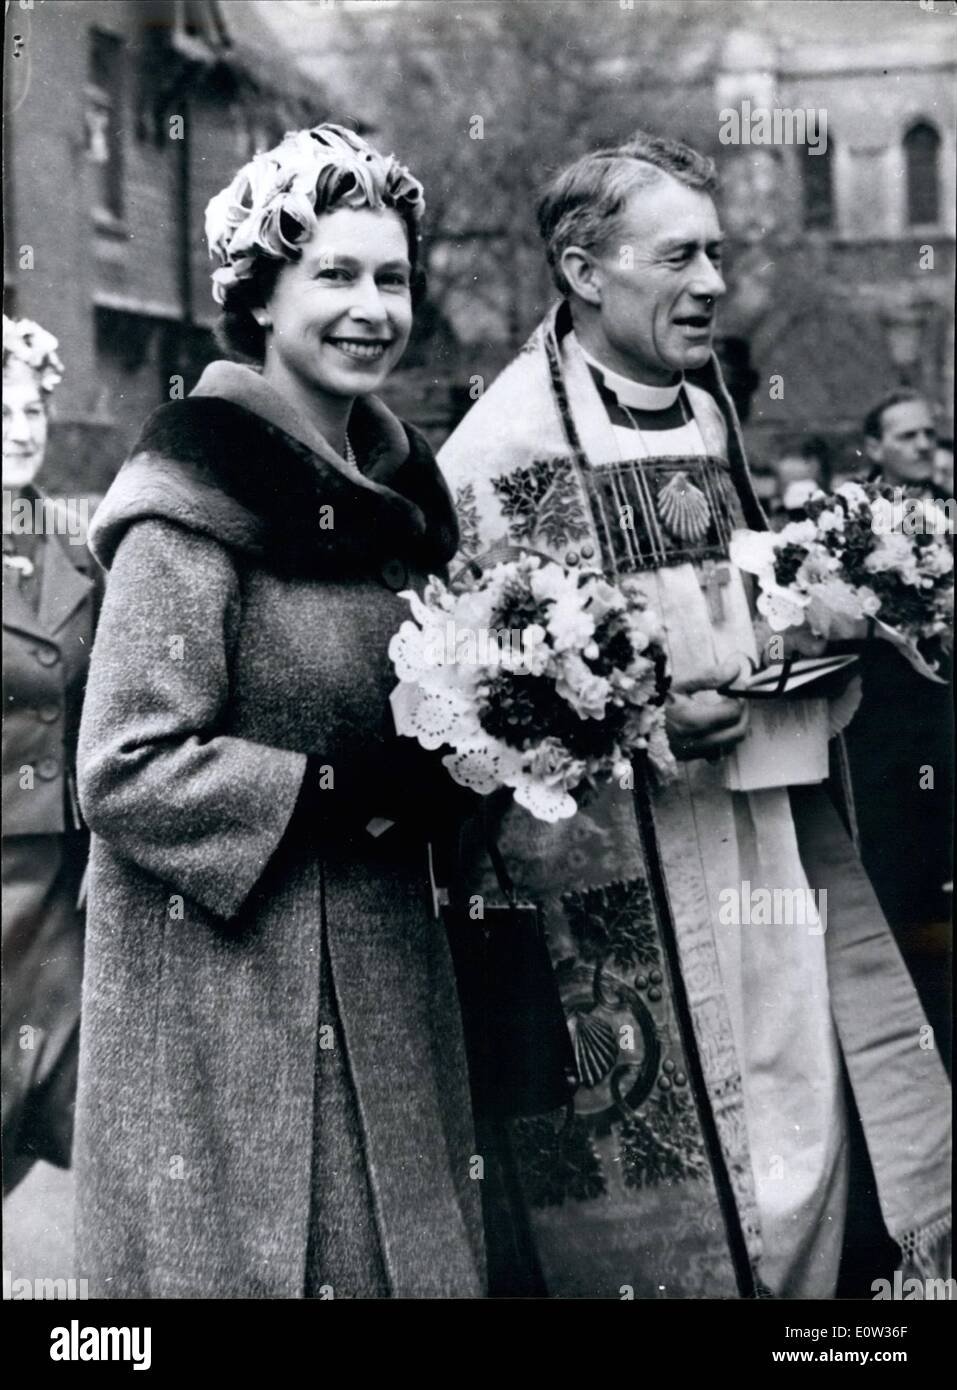 Mar. 03, 1961 - The Queen at The Royal Maundy money ceremony at Rochester Cathedral: H.M. the Queen, distributed the traditional Maundy Money when she visited Rochester Cathedral, Kent, today. Thirty-five elderly men and thirty five elderly women (one for each year of the Queen's age) reached 35 penoe, in specially minted silver fourpenoes threeponeoes, twopenoes and penoe. The distribution in the Royal Maundy gifts, an ancient Royal tradition, perpetuates Our Lord's washing the feet of his Disciples before the Last Supper. Photo shows H.M. the Queen and the Dean of Rochester, the Rt. Rev Stock Photo